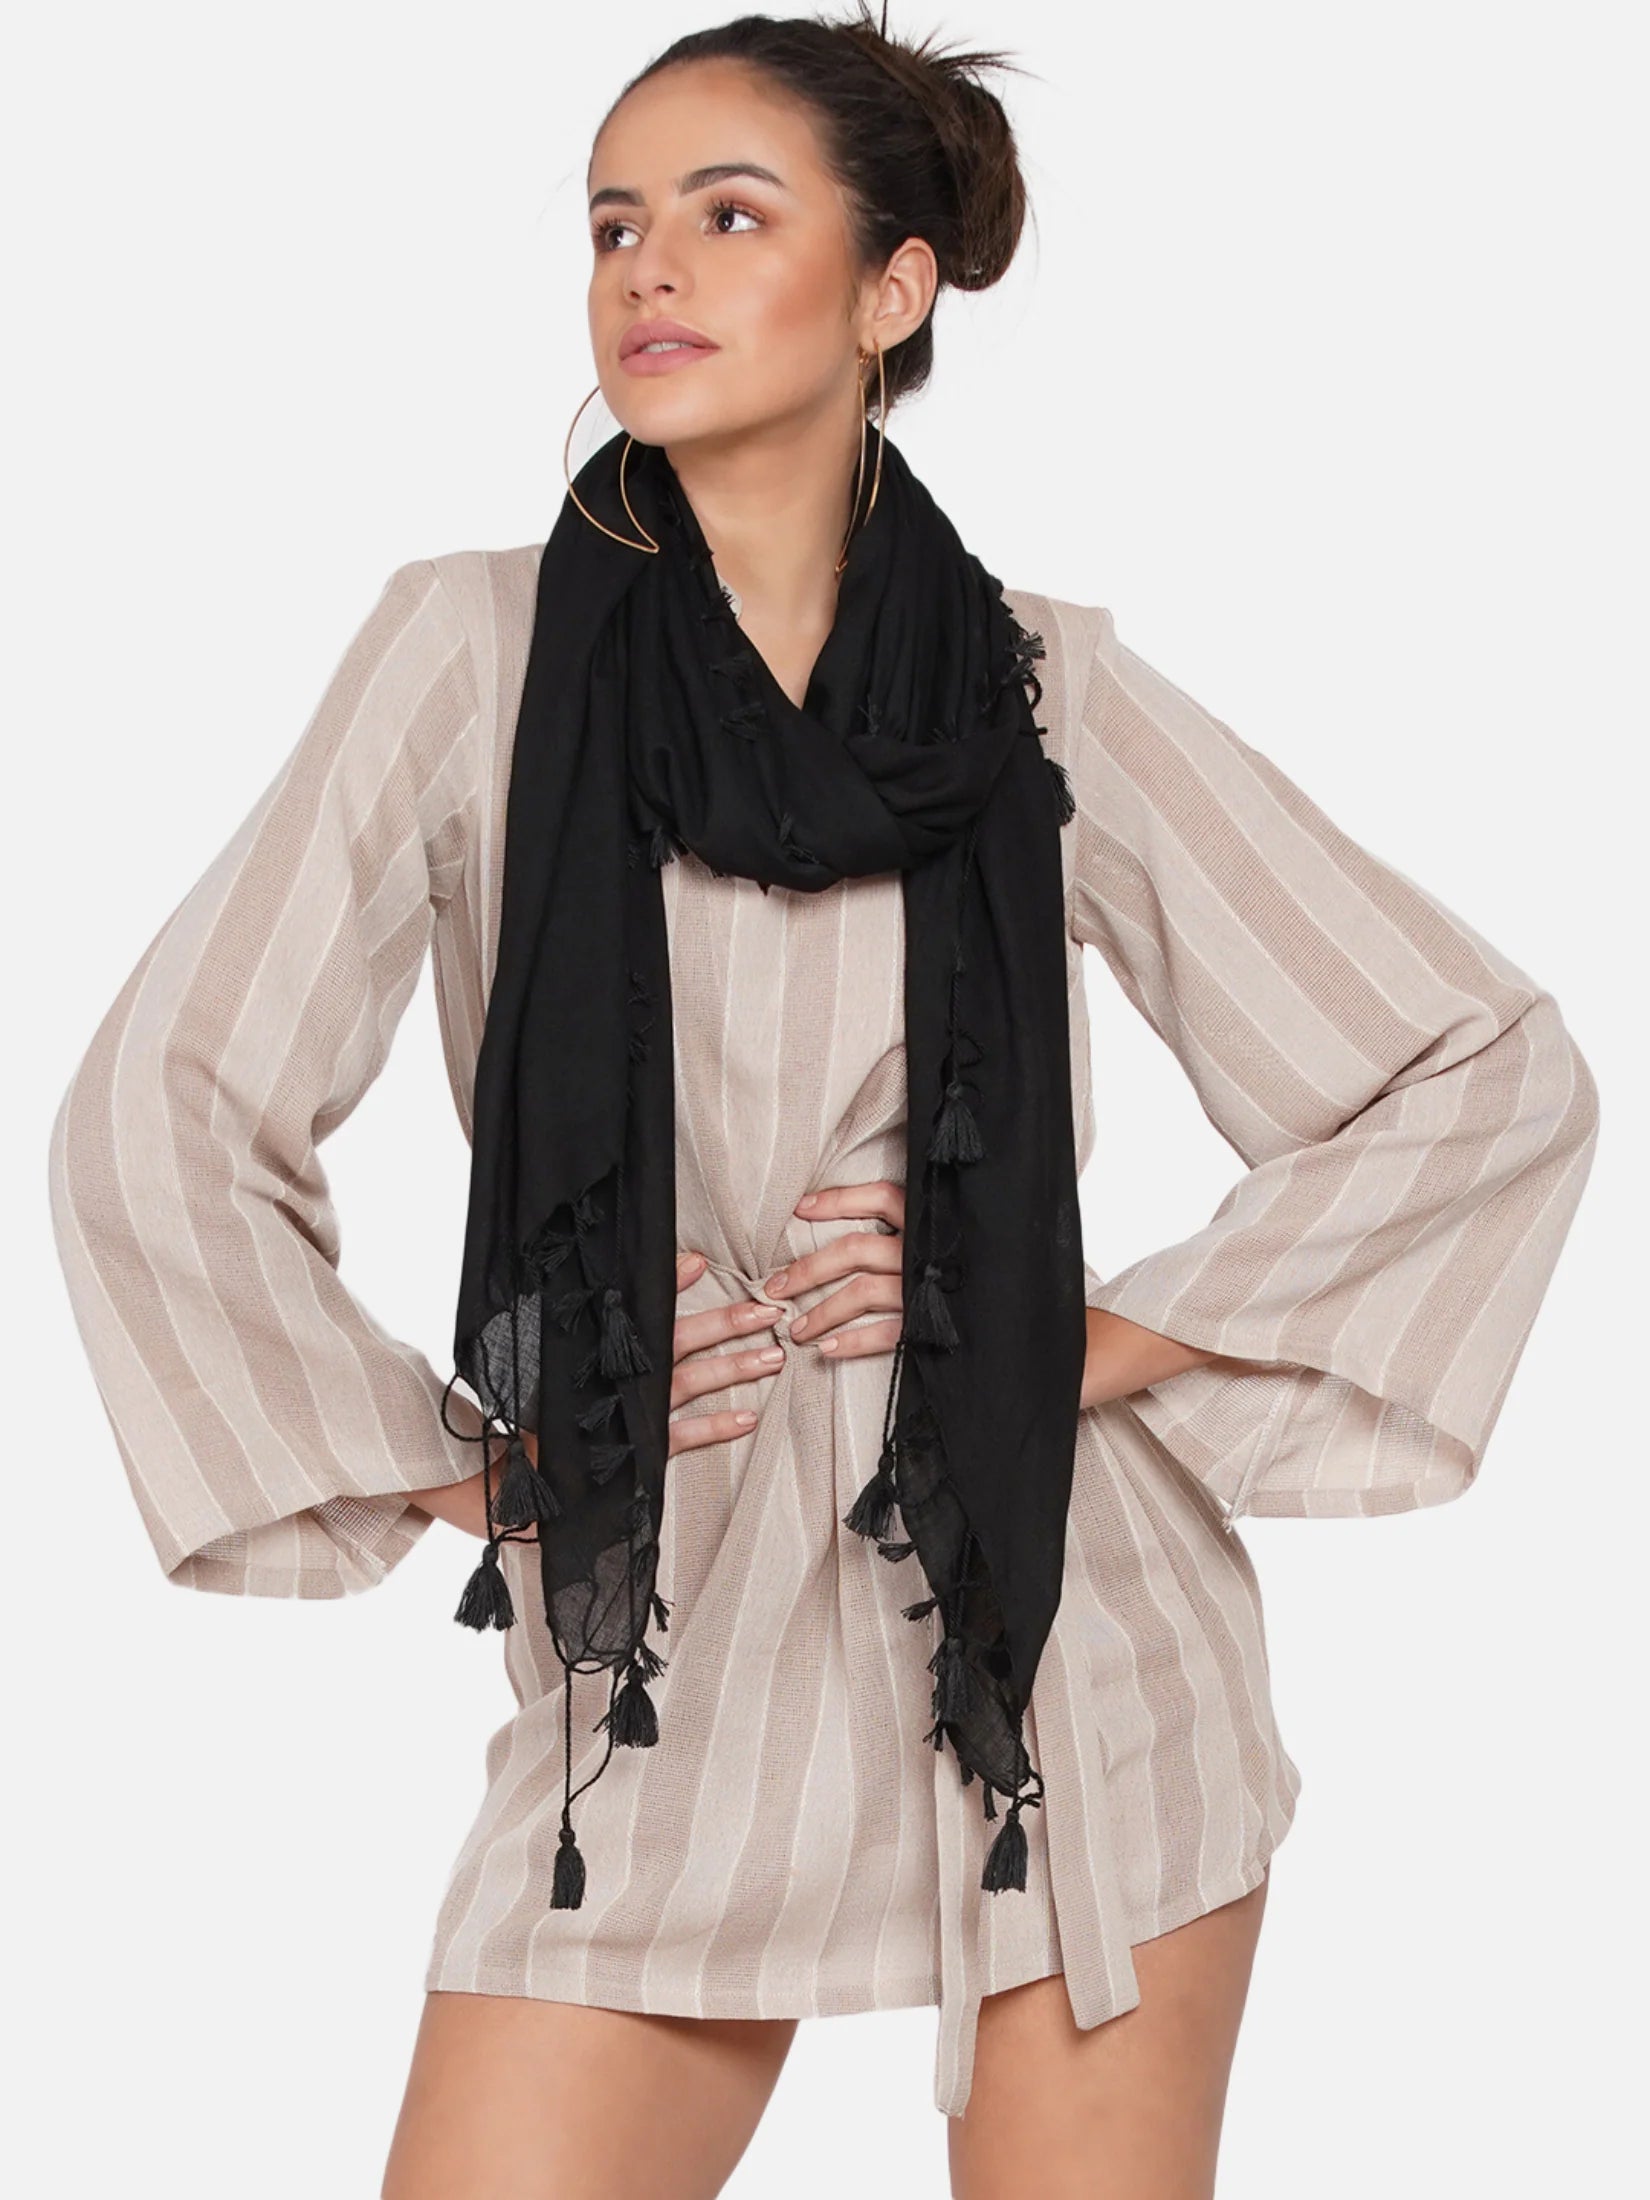 GET 2 SOLID SCARVES FOR JUST RS 899